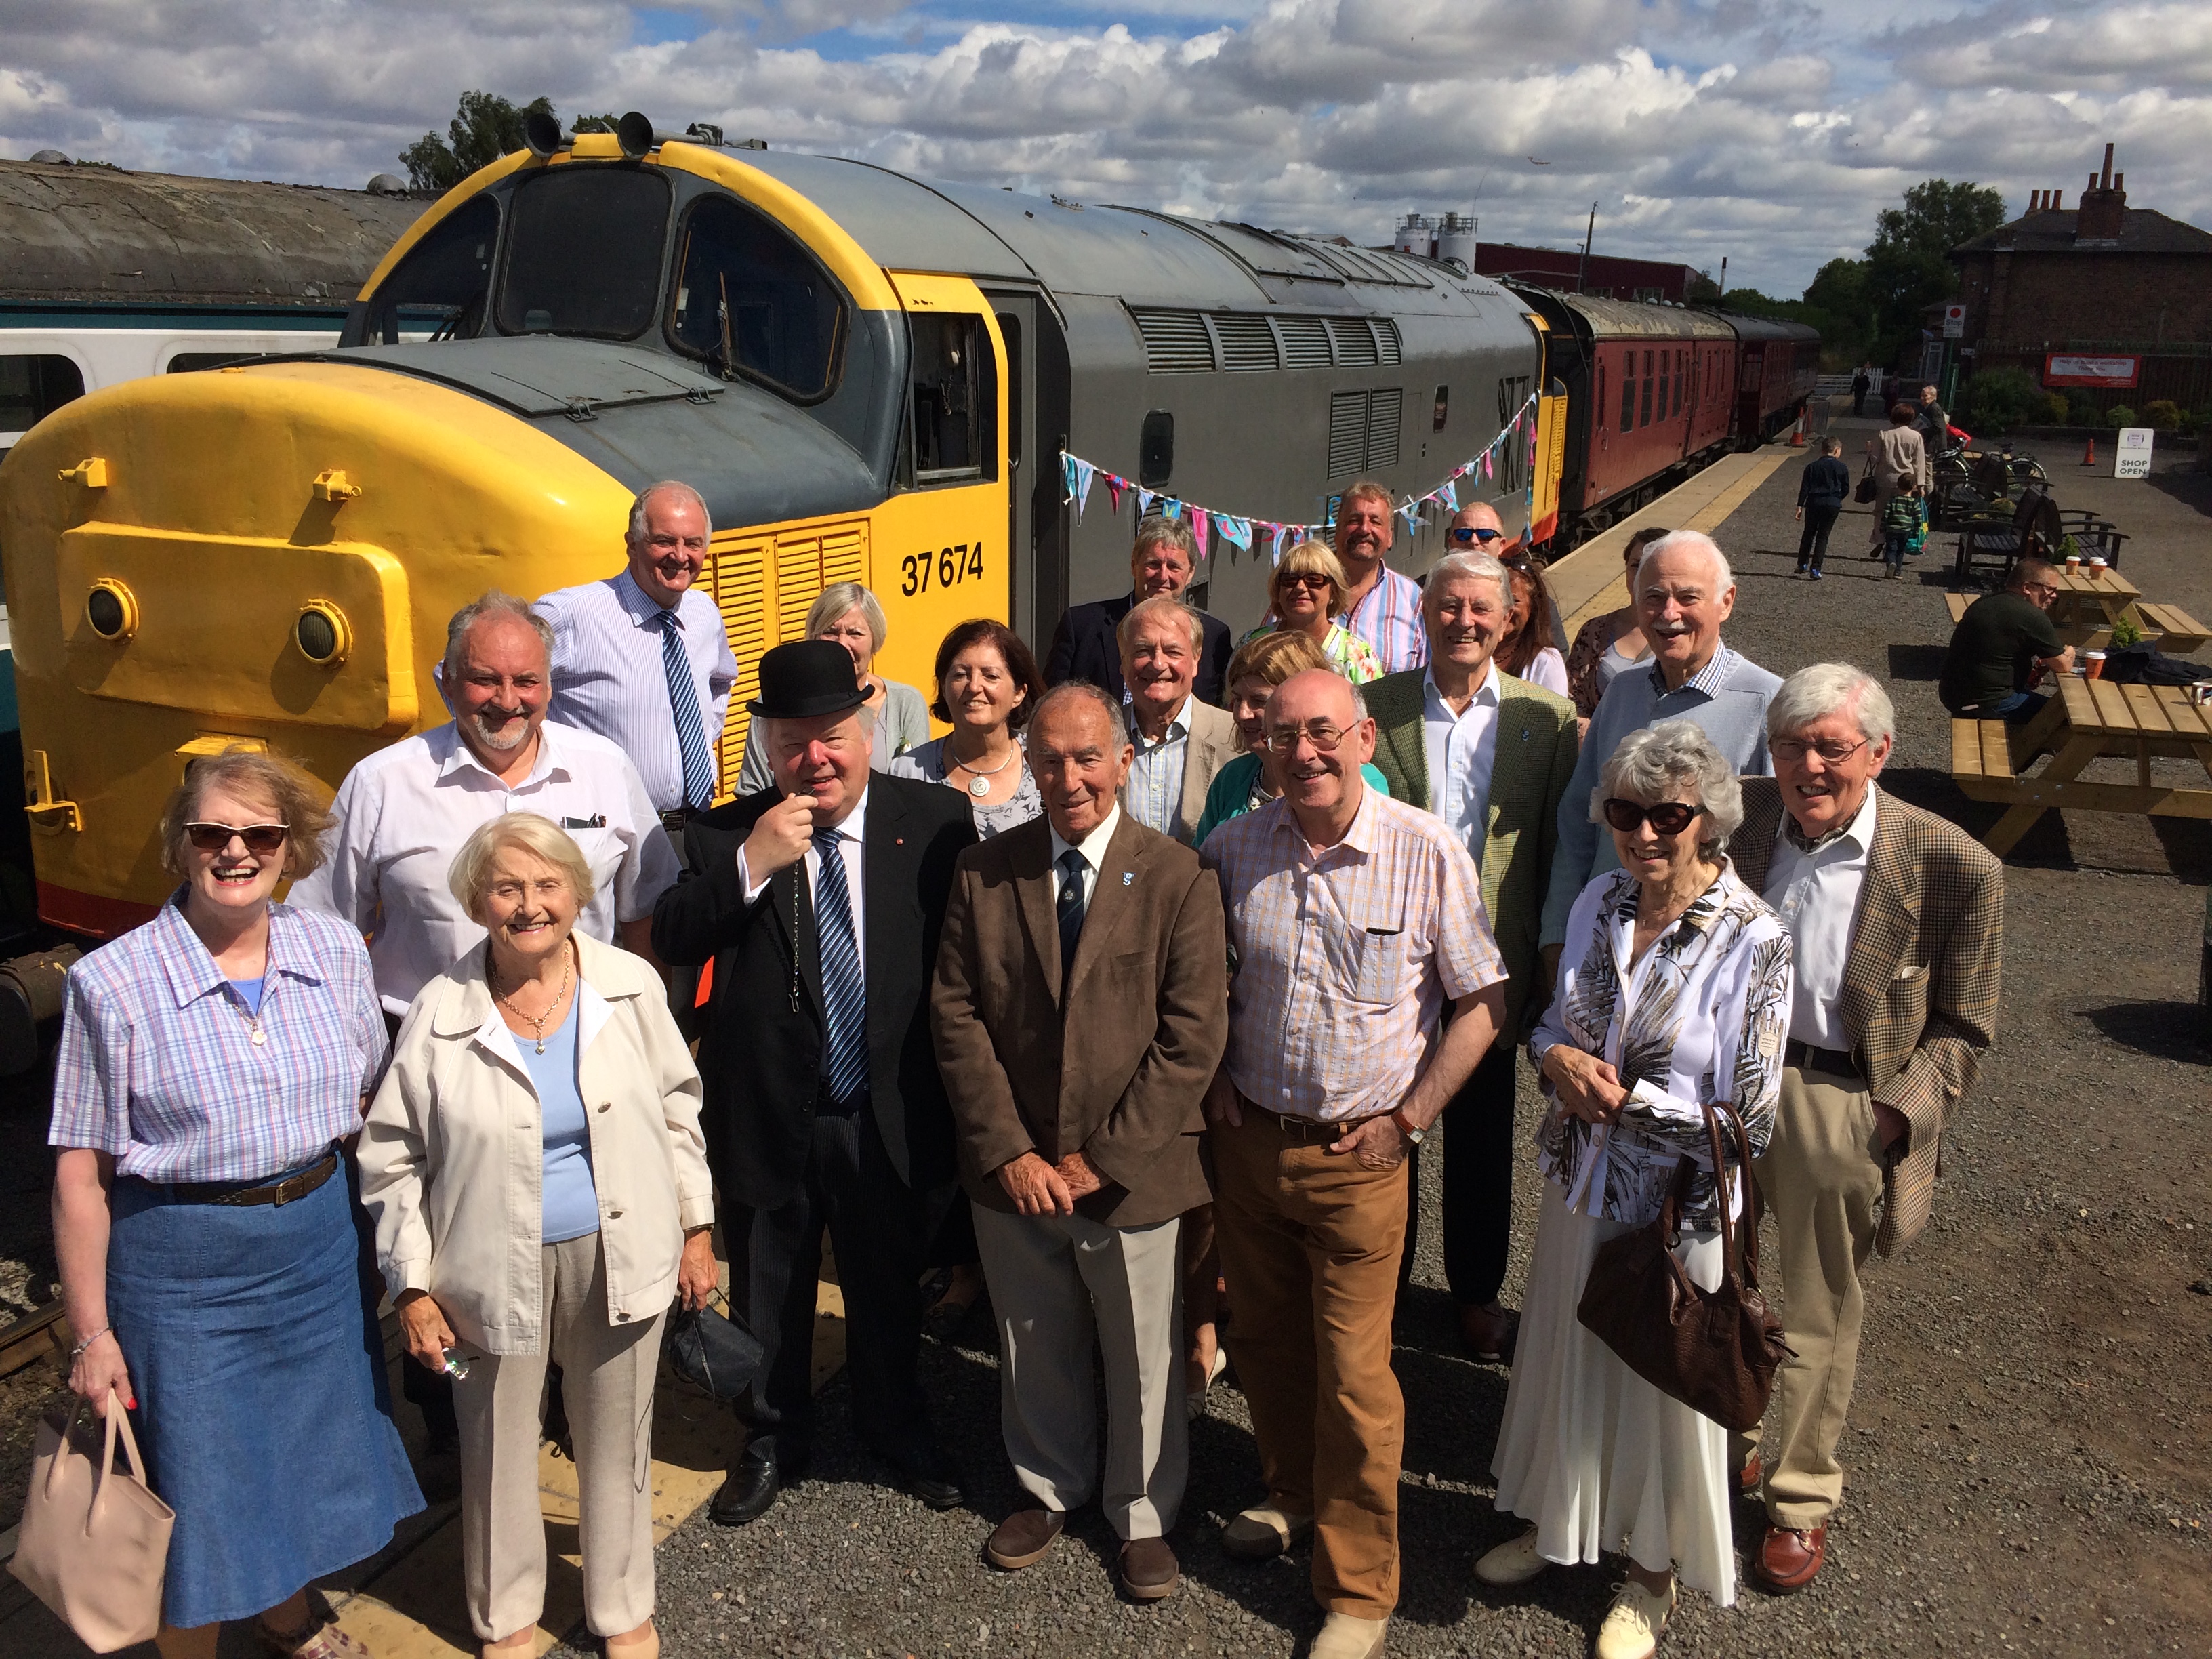 The Yorkshire Society at Wensleydale Railway for Yorkshire Day 'Prequel' on 31st July 2016